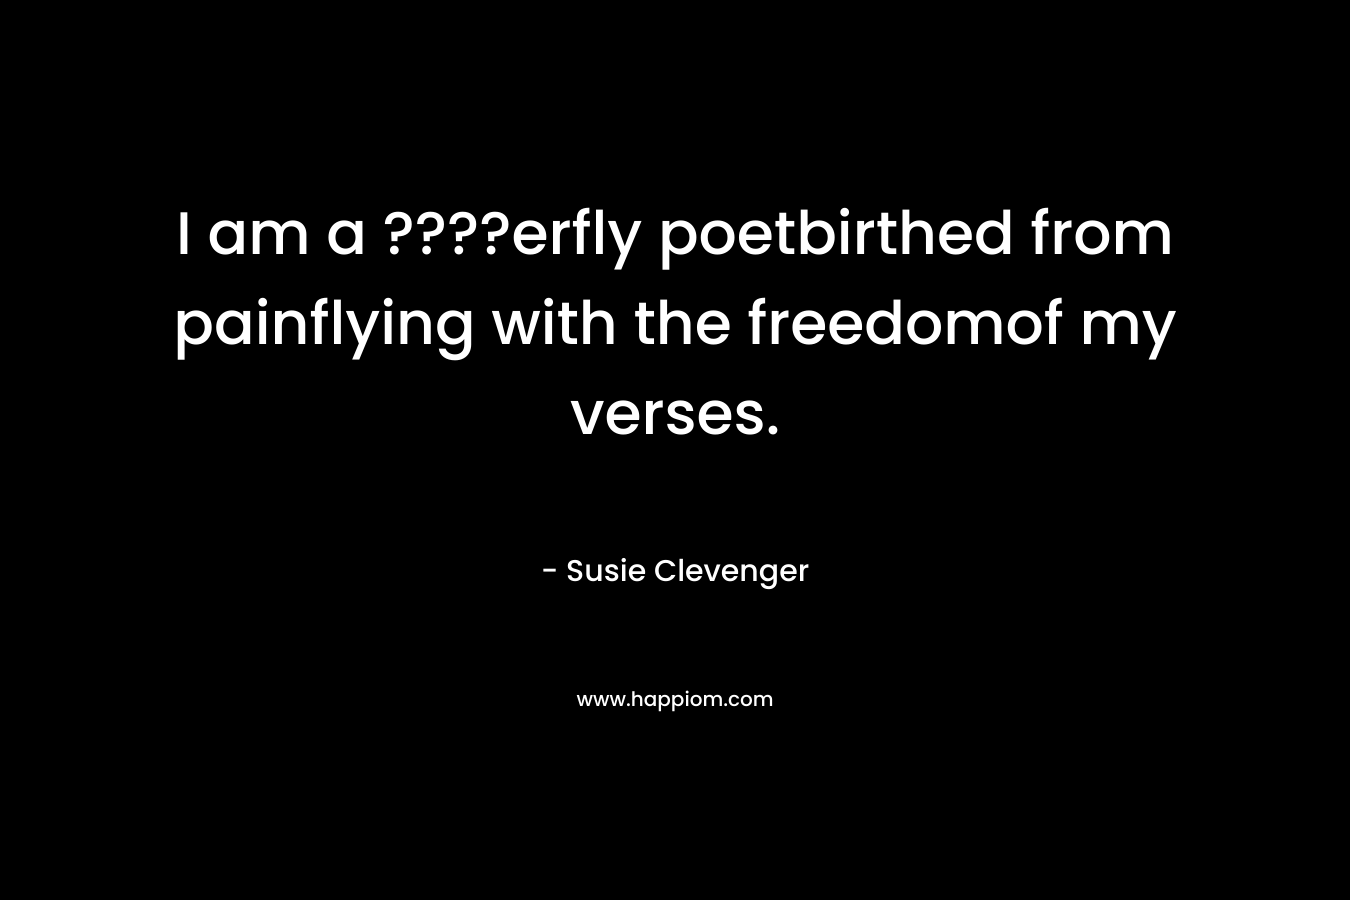 I am a ????erfly poetbirthed from painflying with the freedomof my verses.